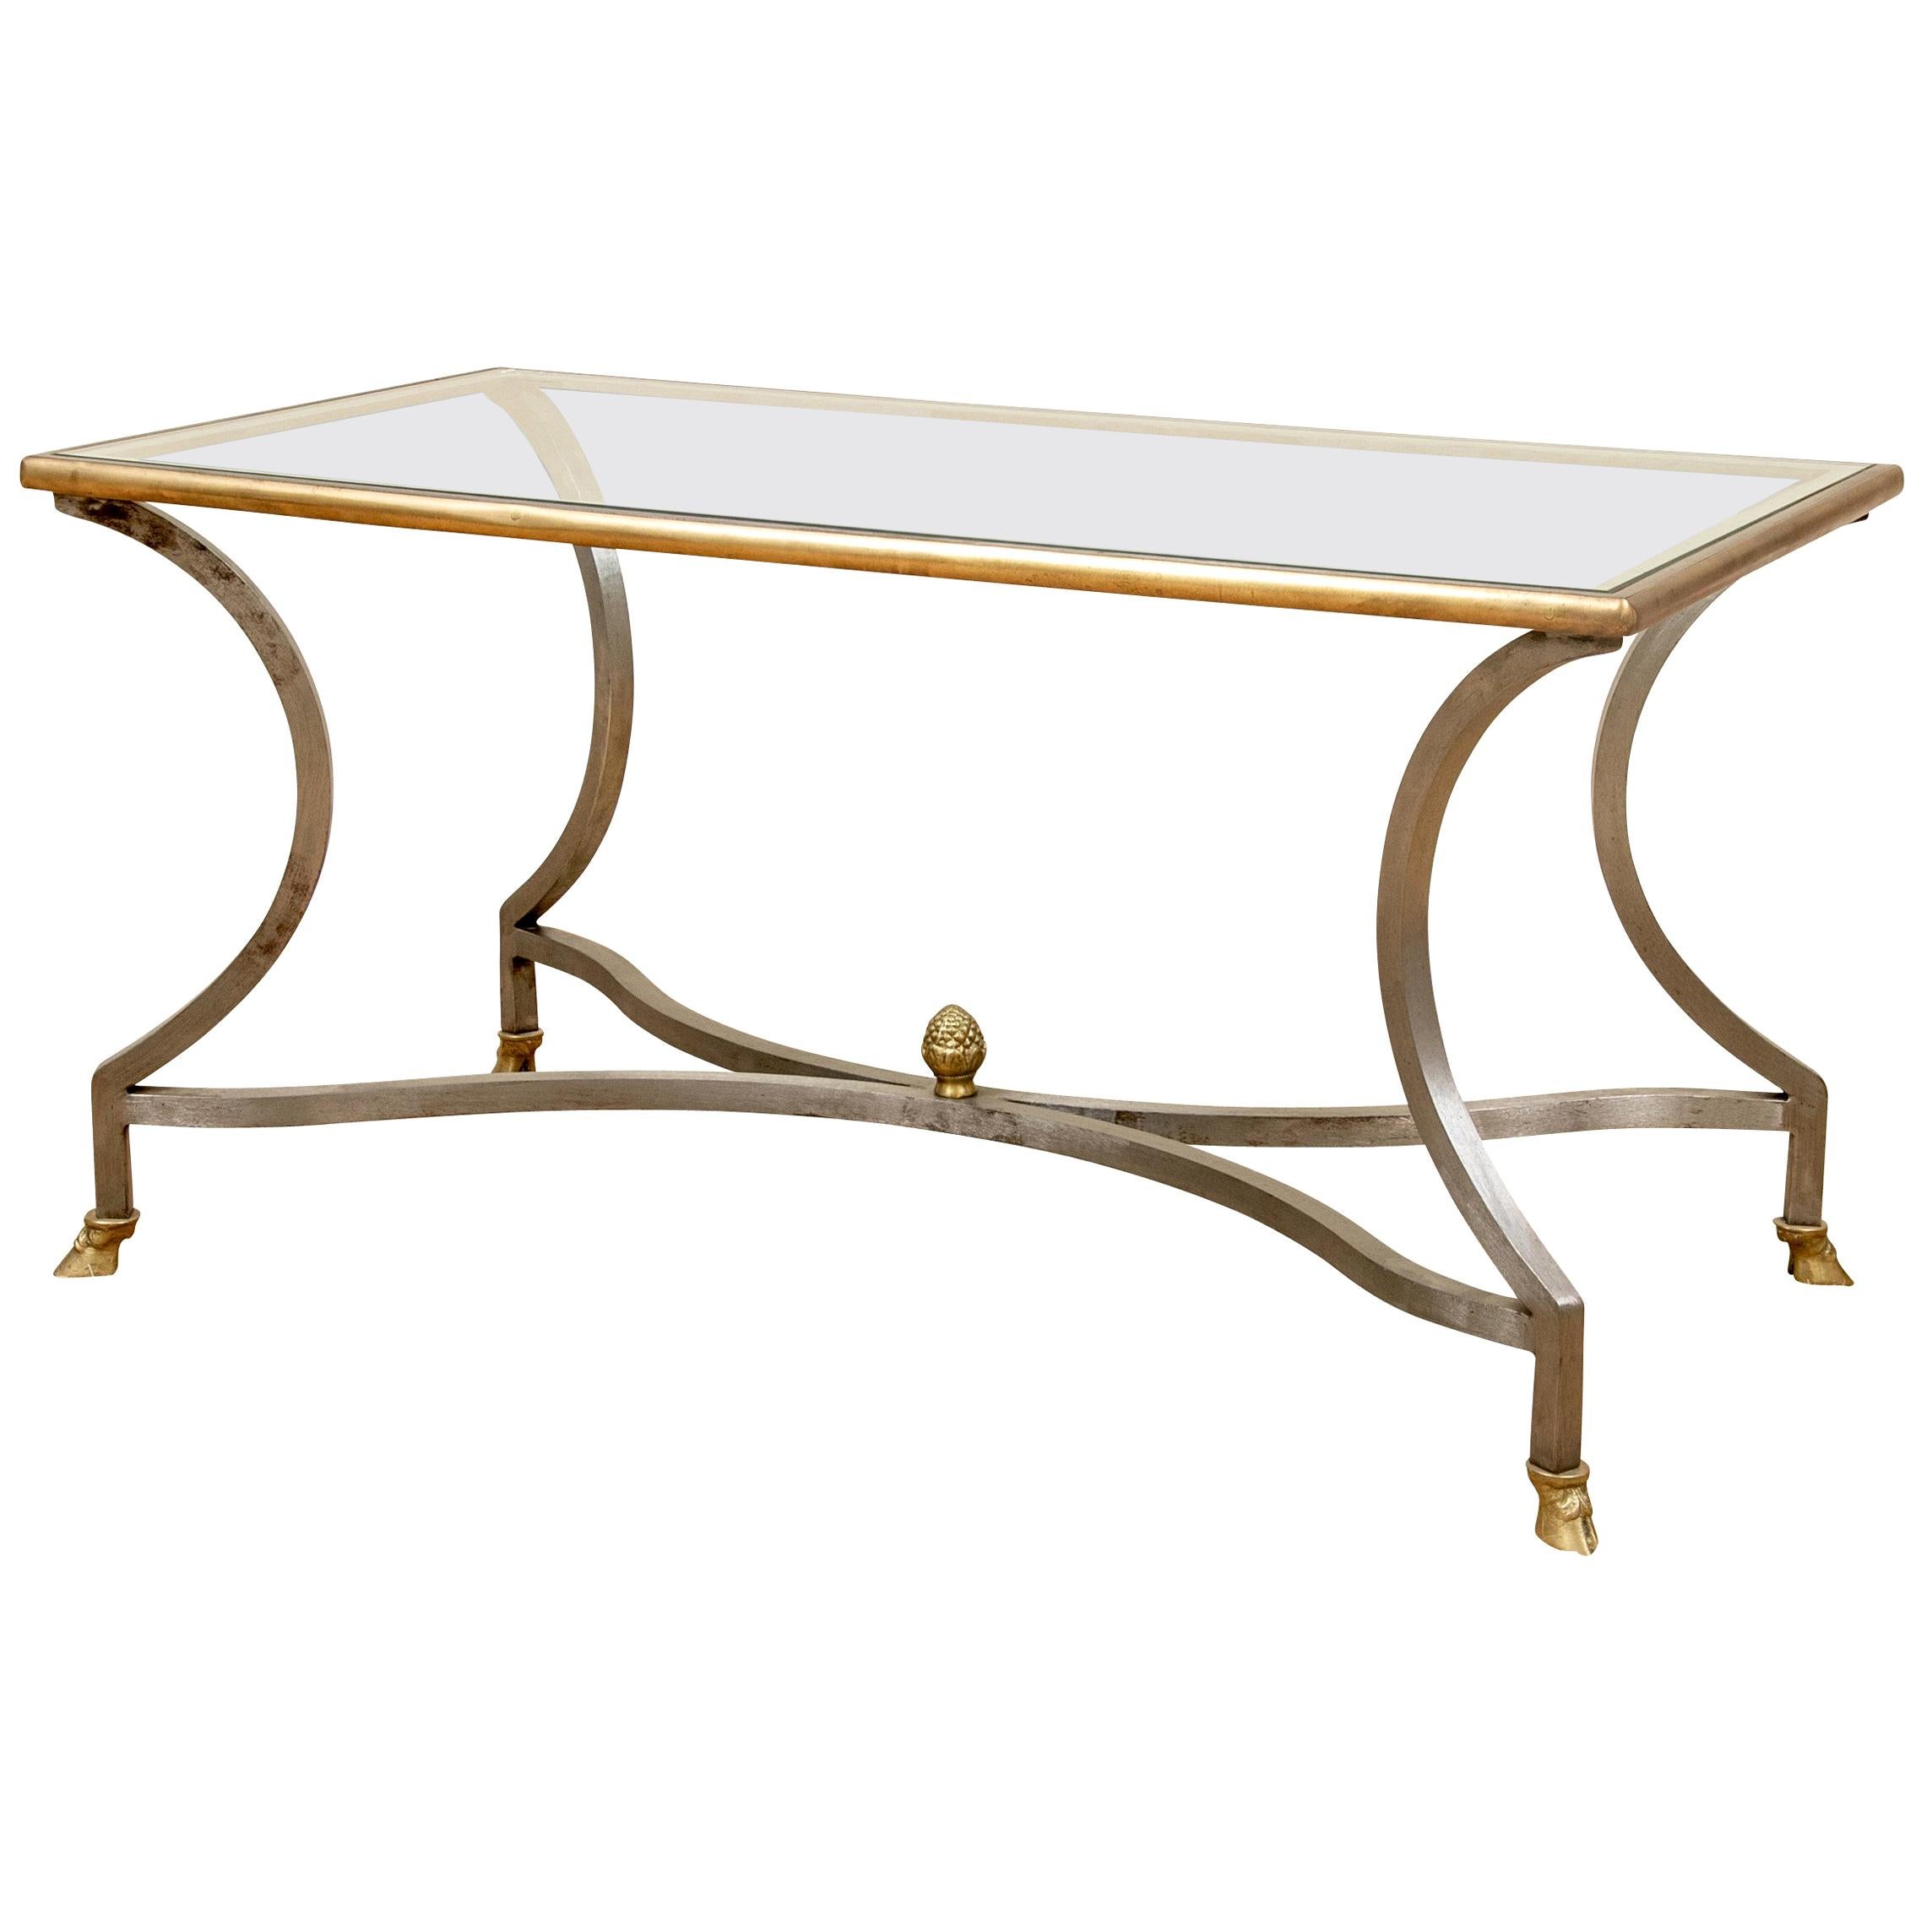 Neoclassical Style Steel and Brass Hoof Foot Cocktail Table